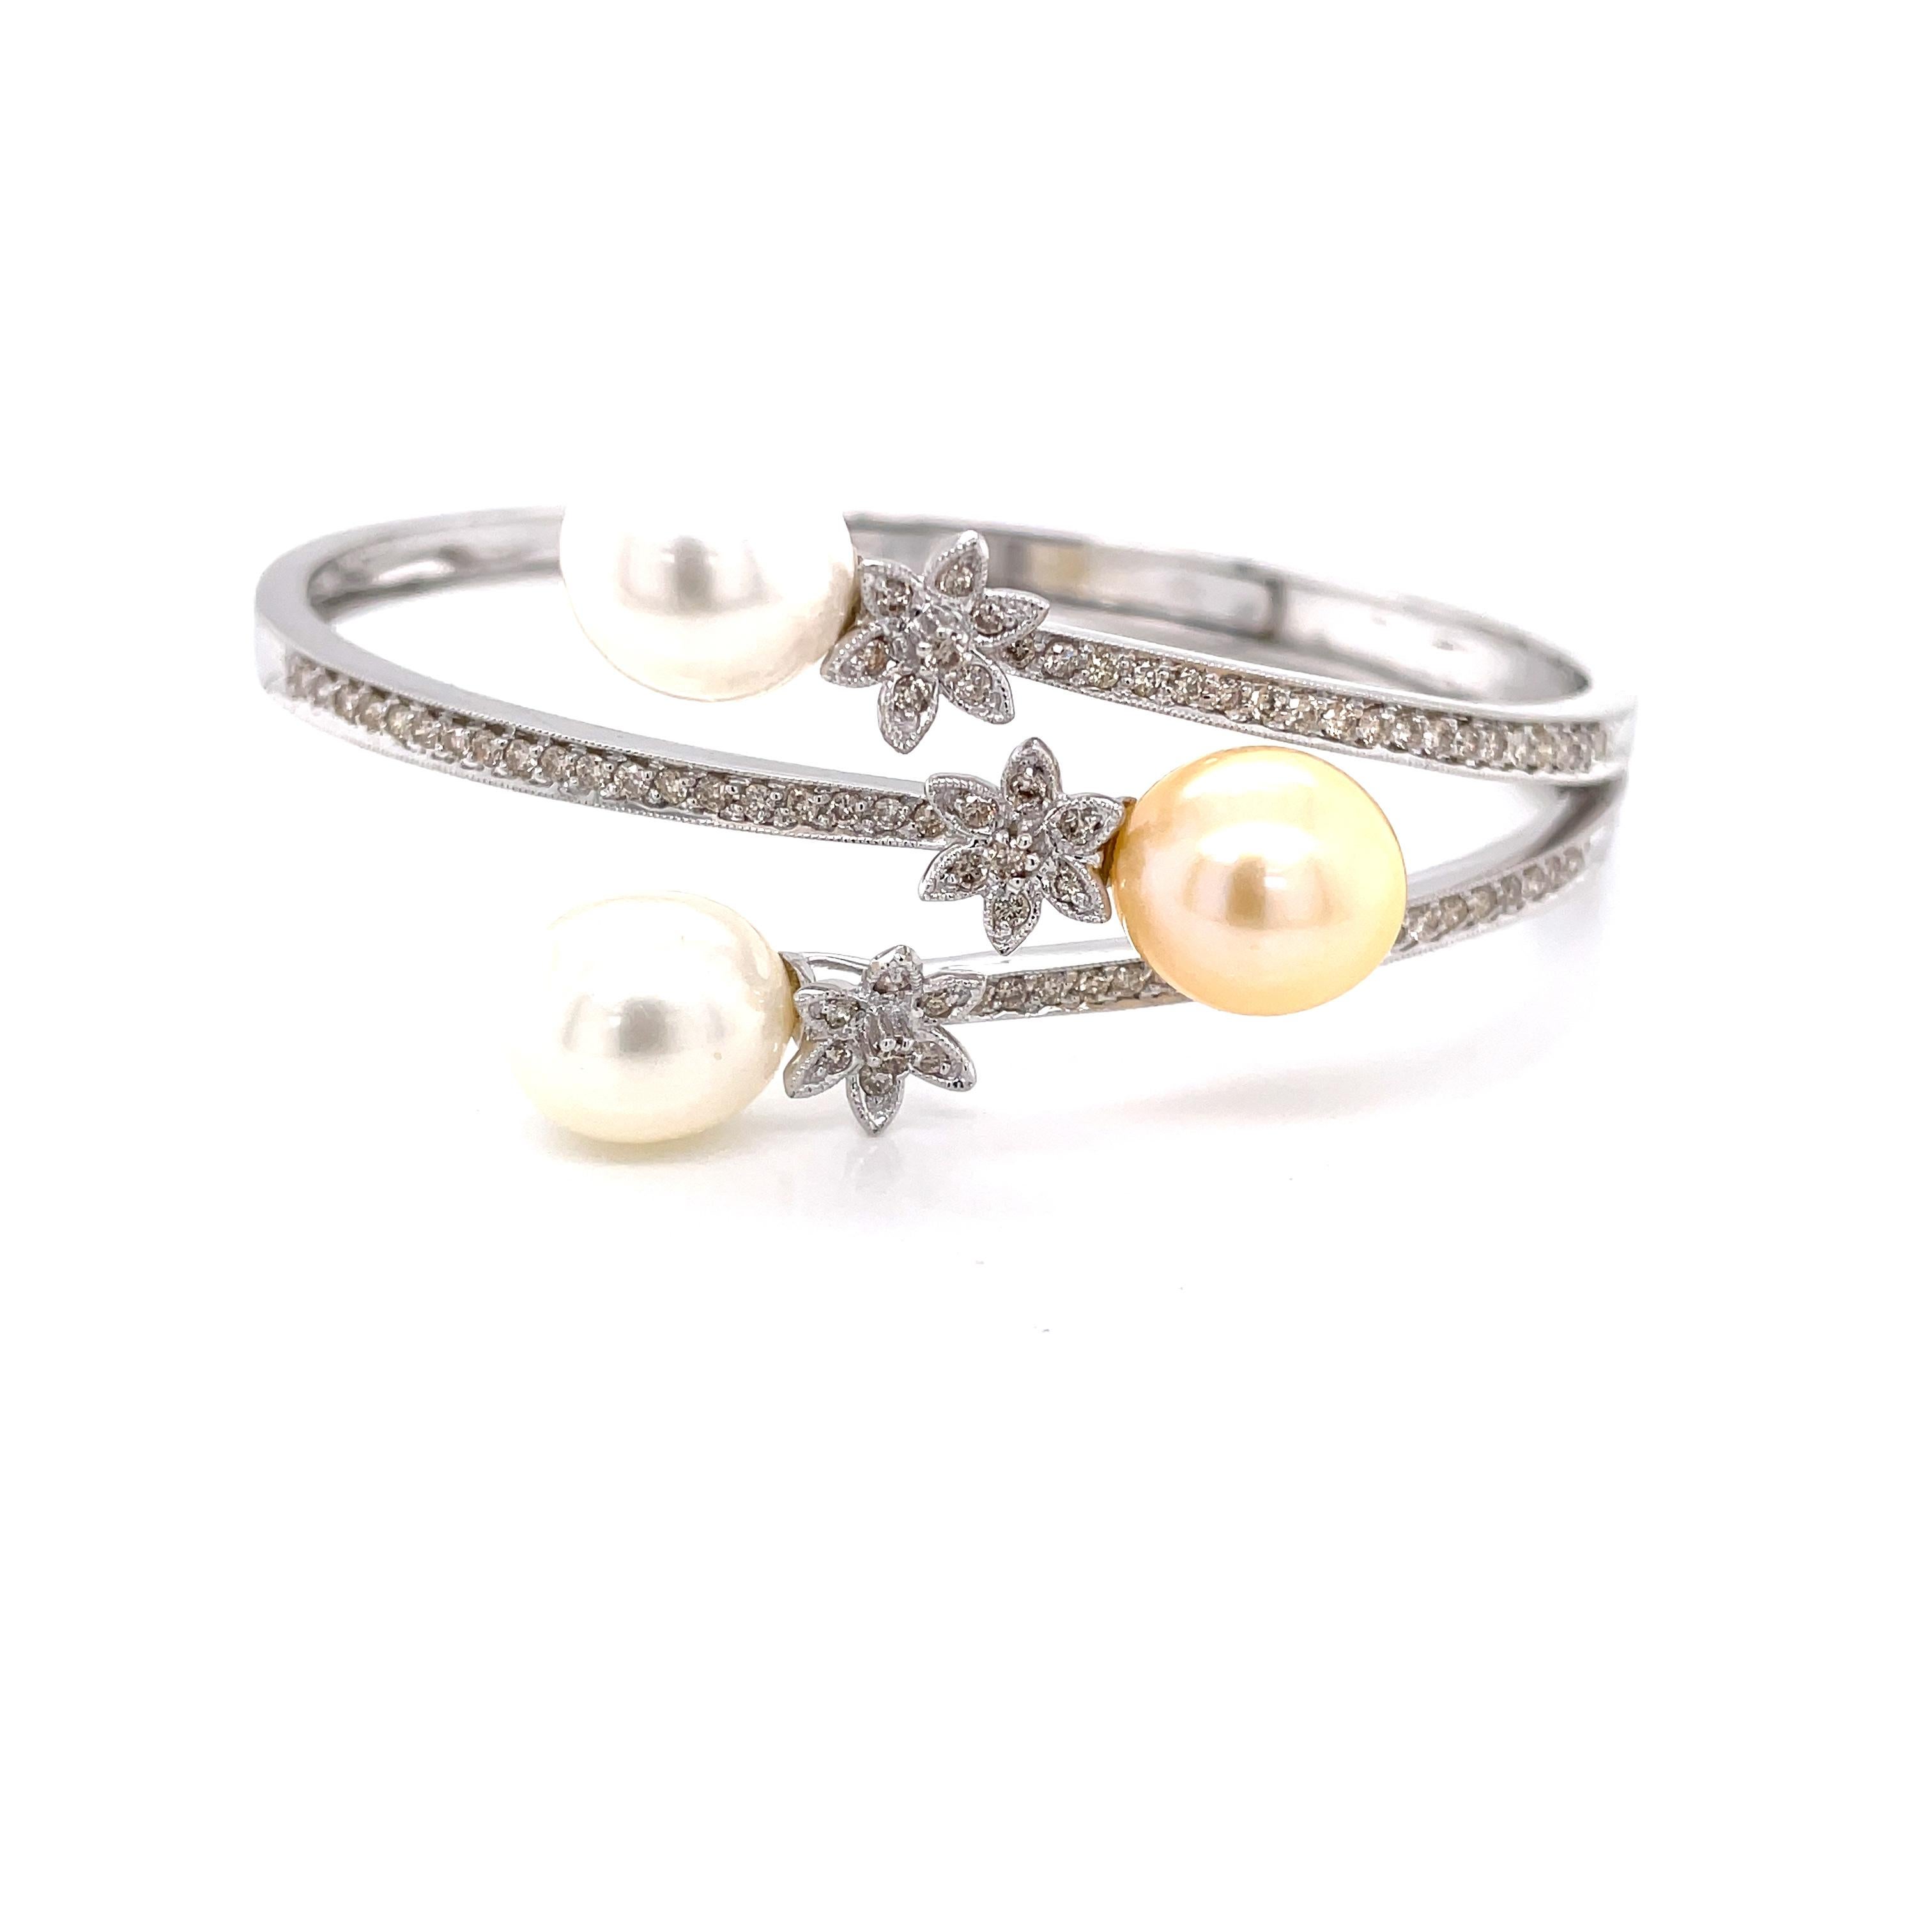 Teardrop Pearl Diamond Wrap Style 18 Karat White Gold Bangle In Good Condition For Sale In Mount Kisco, NY